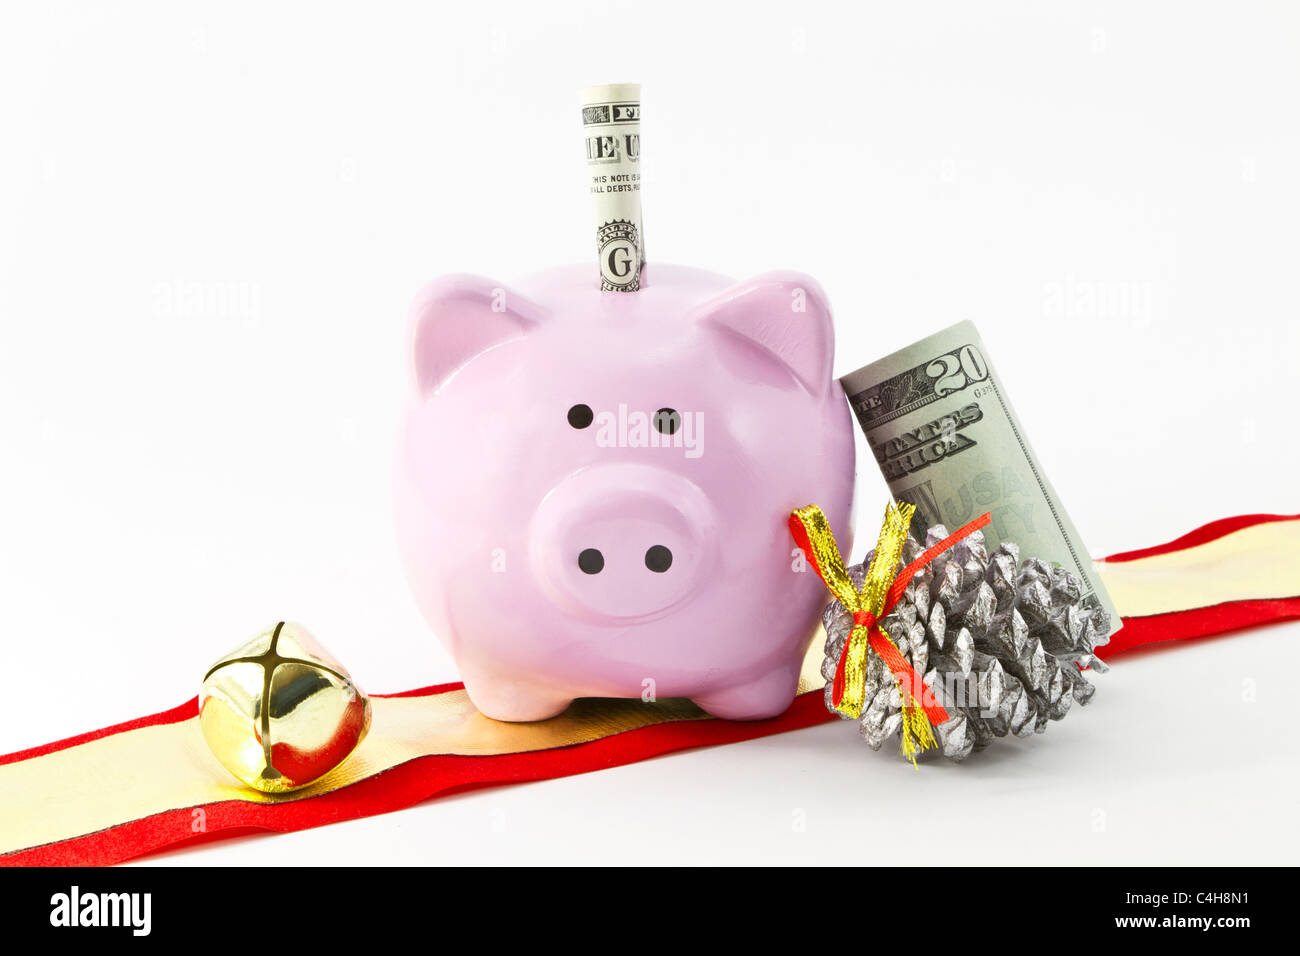 Pink bank shaped like a pig is placed with currency, silver pine cone, and holiday ribbon with bells. Stock Photo